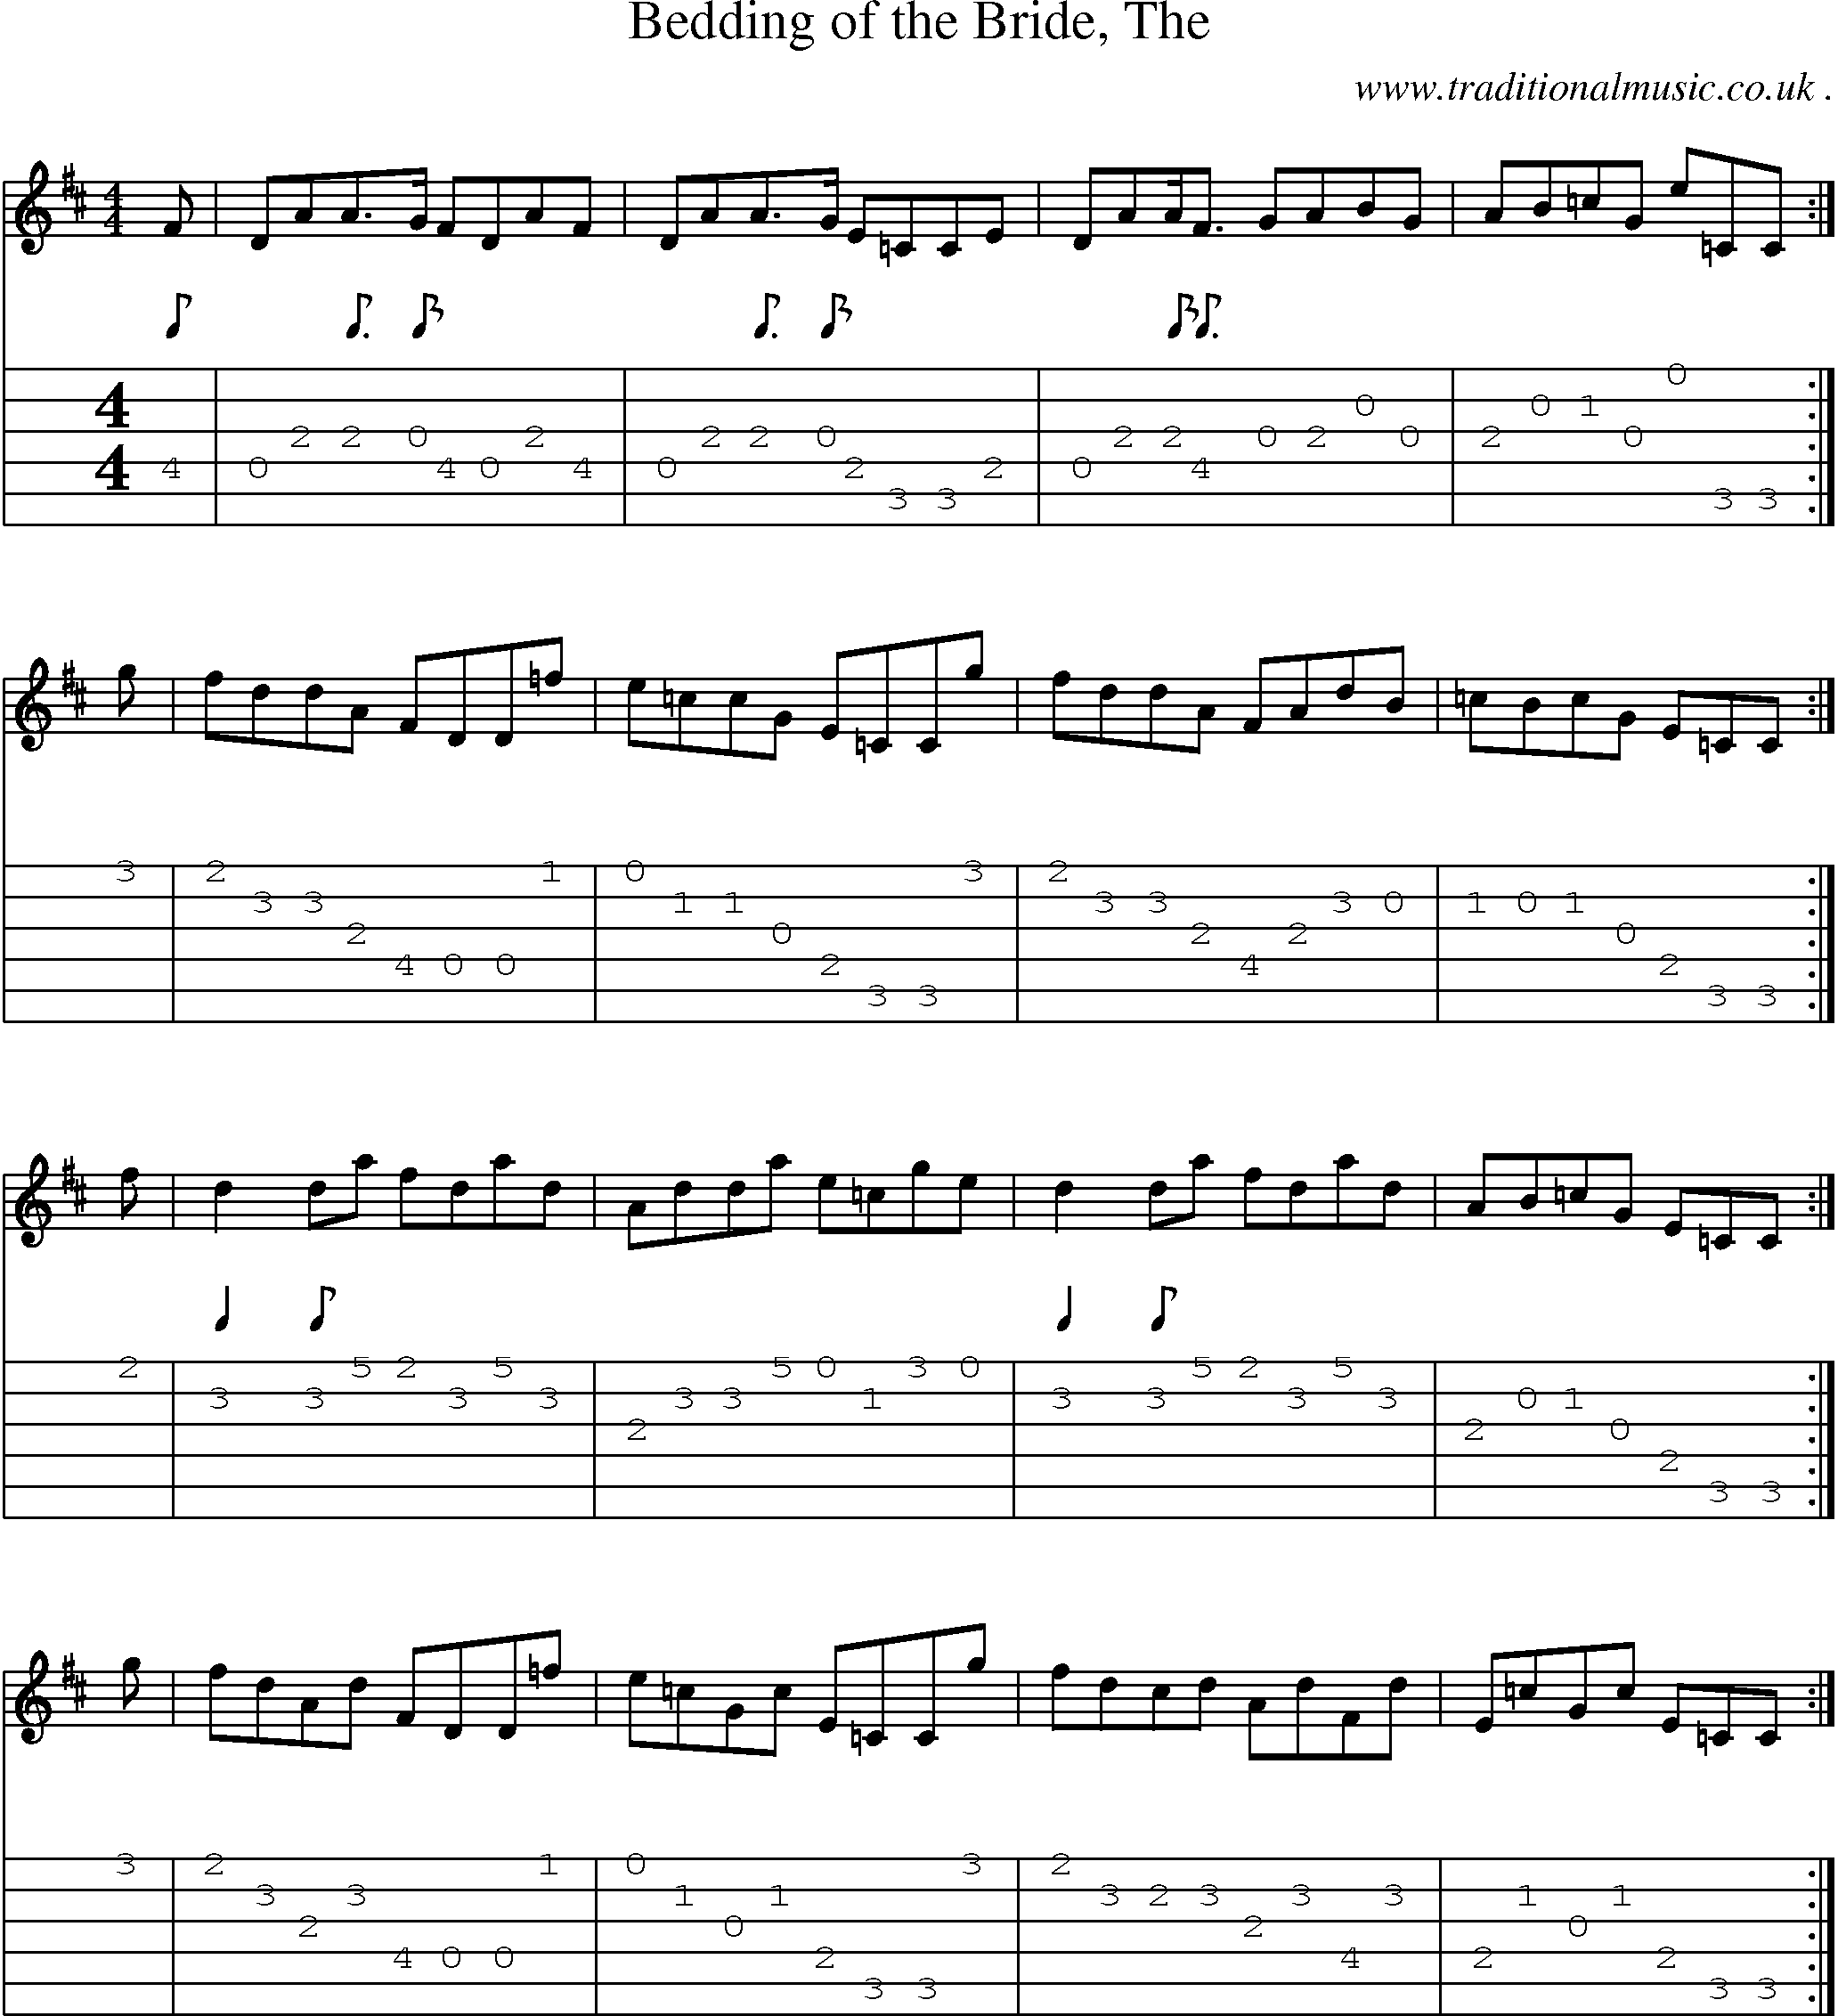 Sheet-music  score, Chords and Guitar Tabs for Bedding Of The Bride The